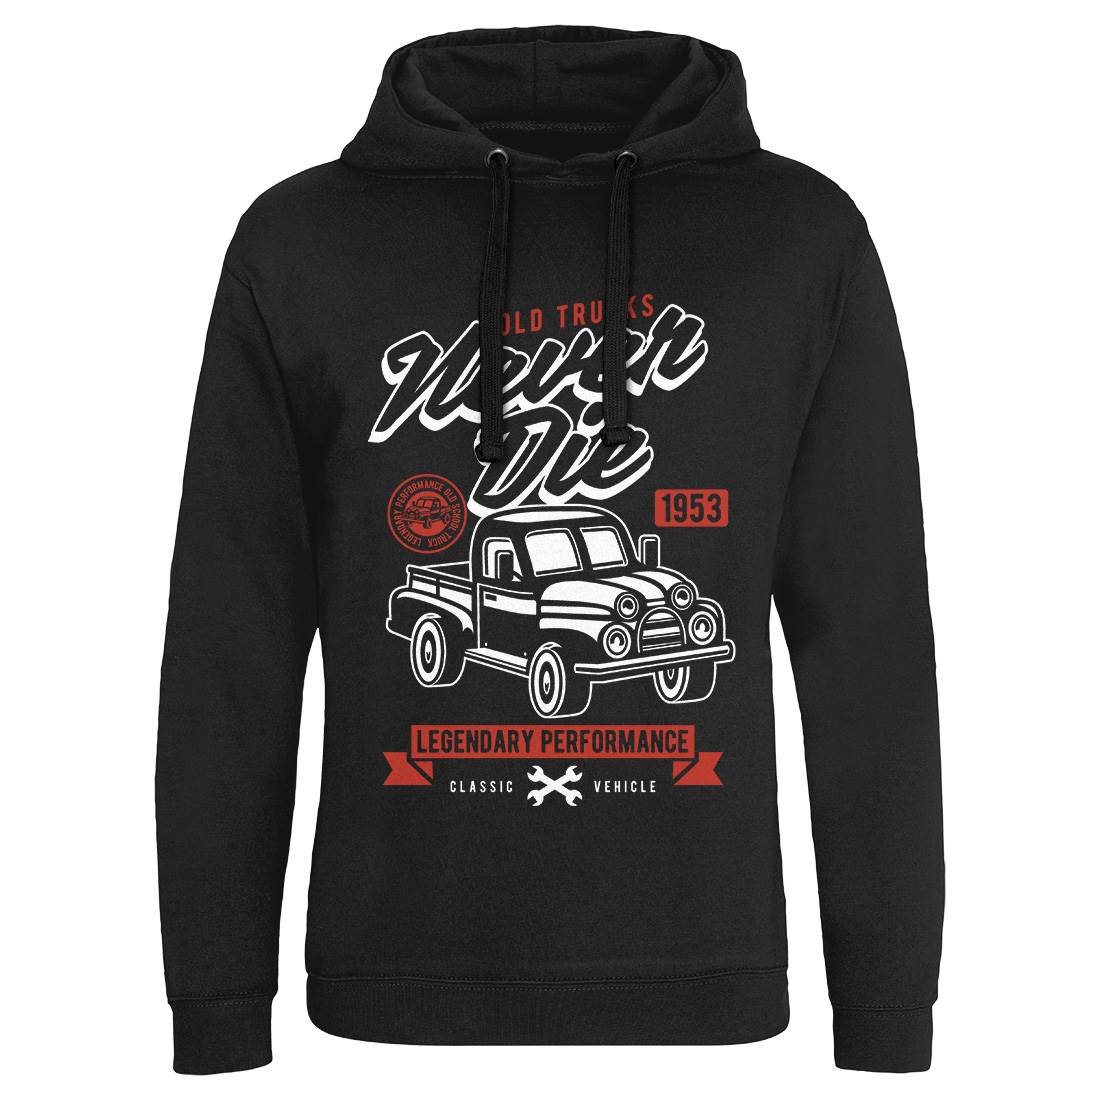 Old Trucks Mens Hoodie Without Pocket Vehicles A256